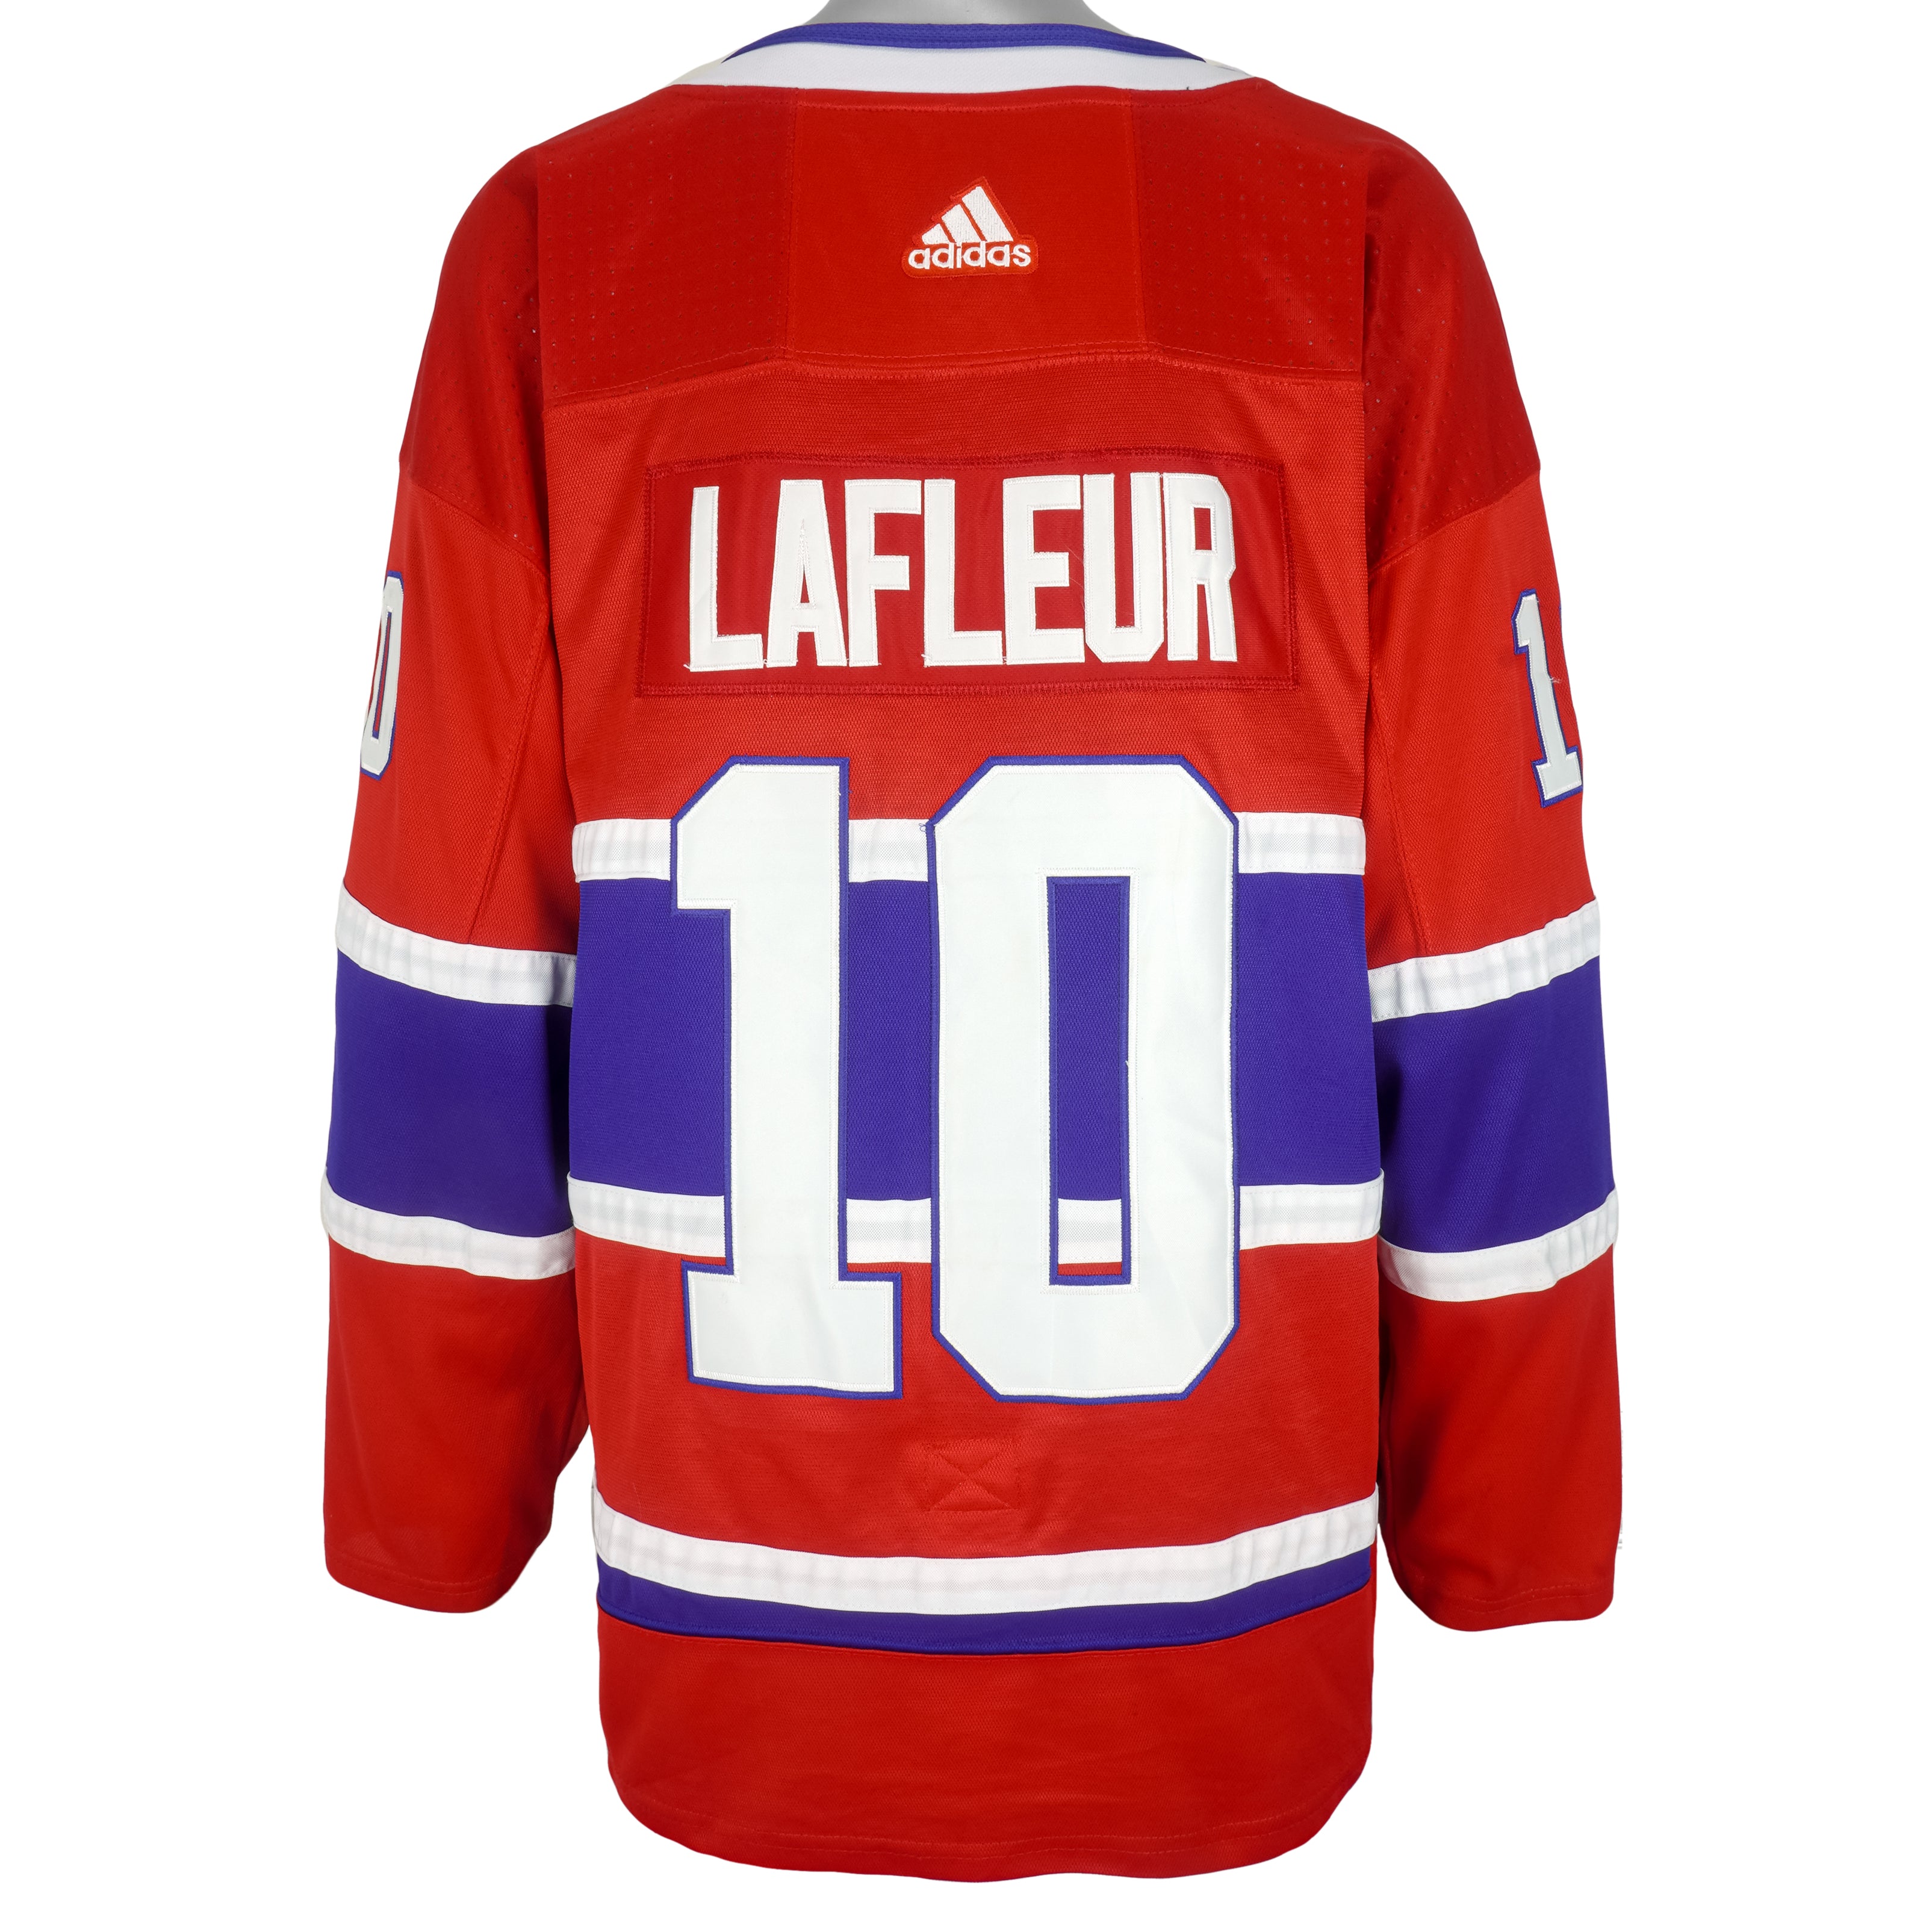 Guy LaFleur #10 Patch Montreal Canadians Memorial Patch Hockey Jersey Patch  nhl